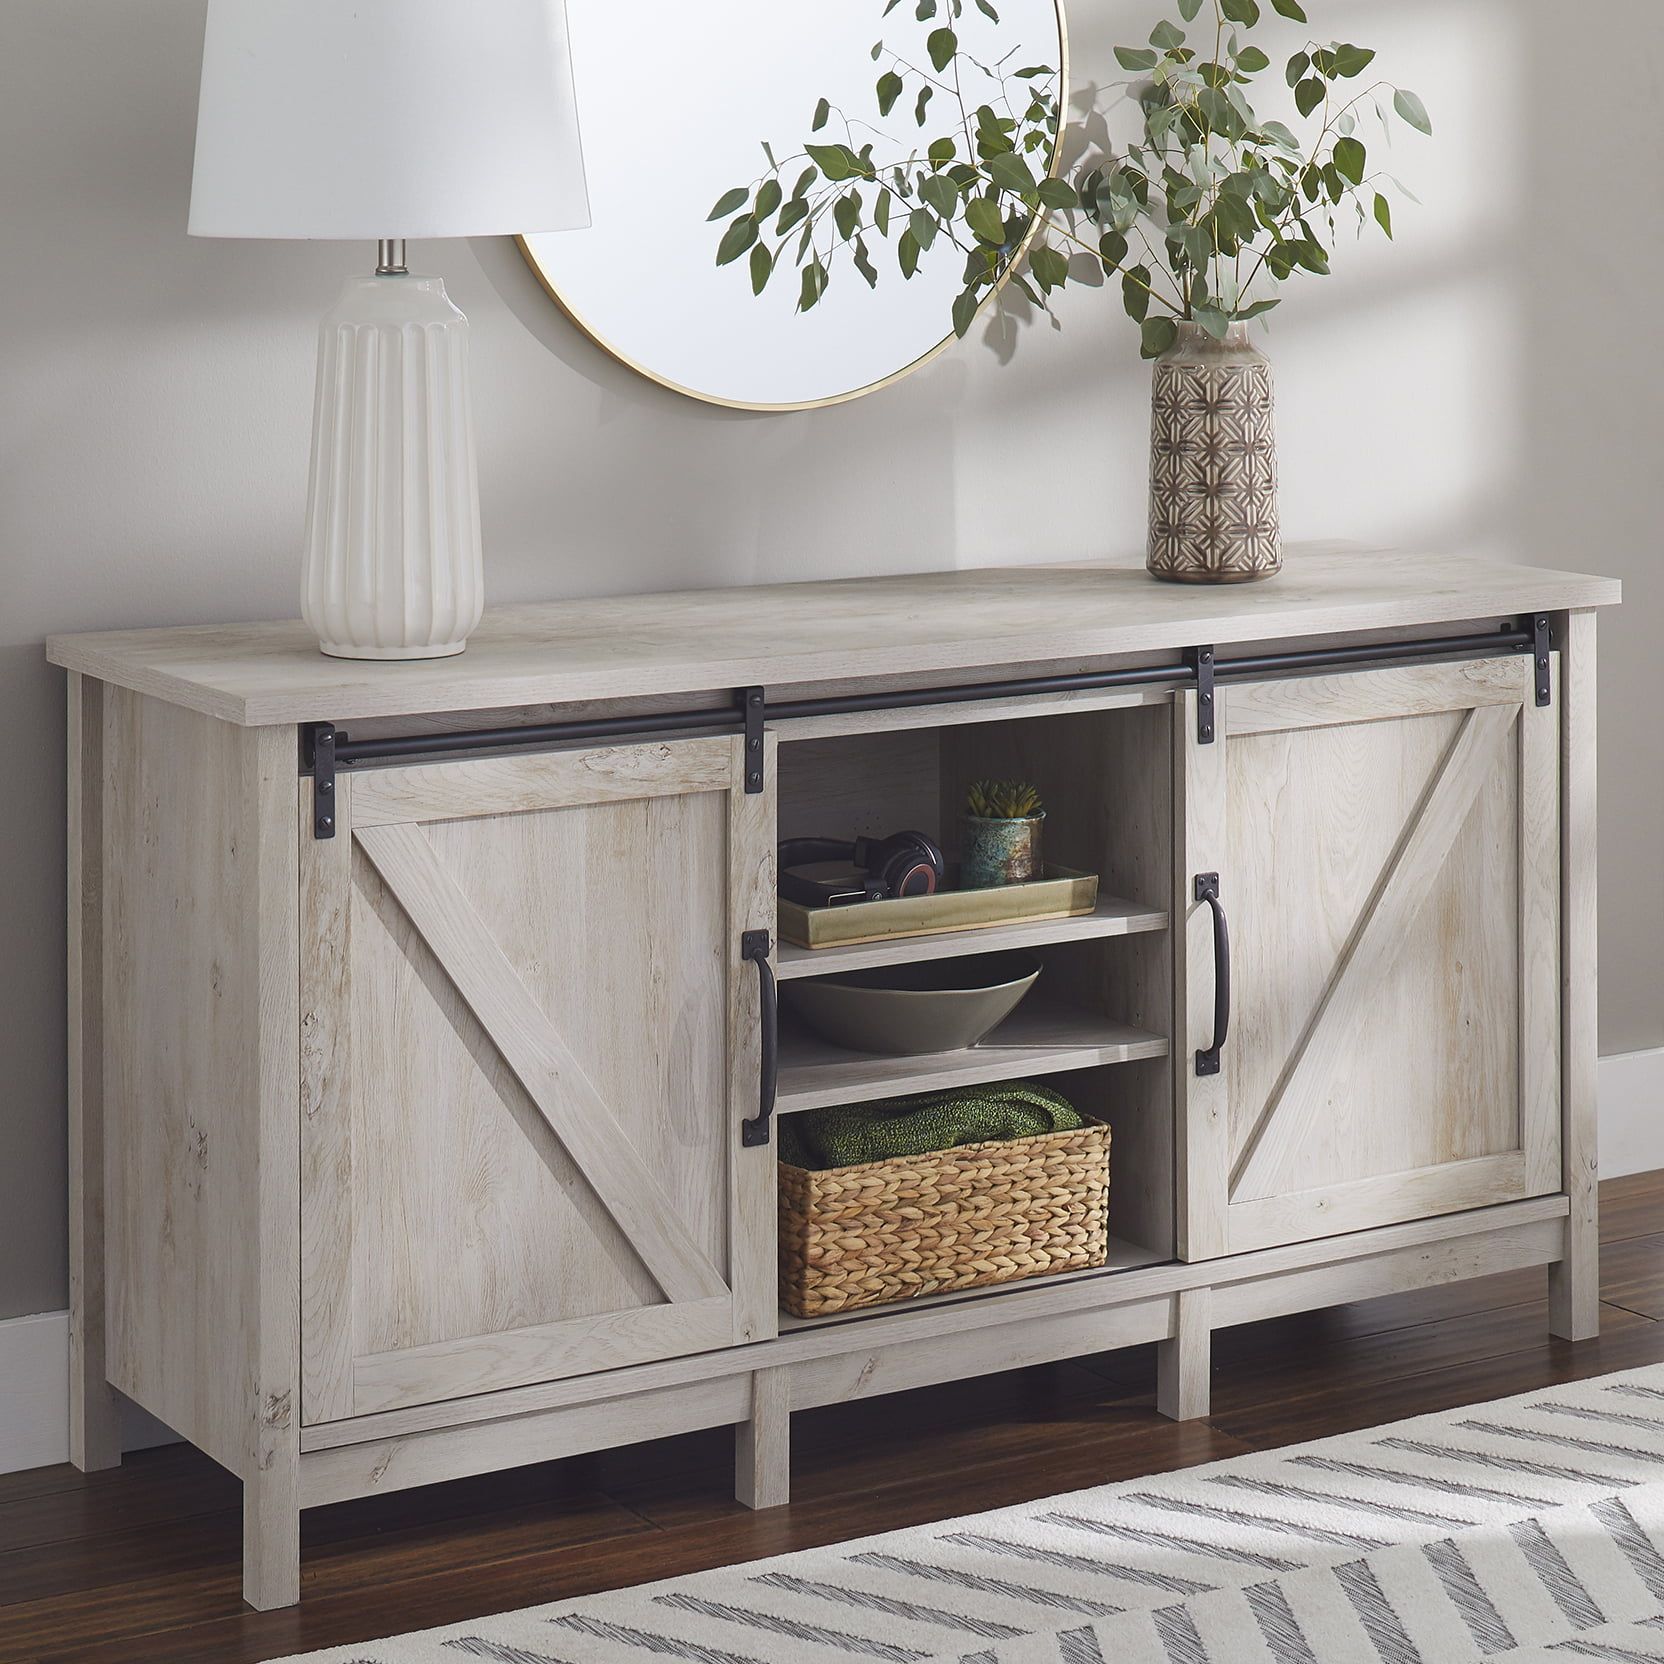 Better Homes & Gardens Modern Farmhouse Tv Stand For Tvs Up To 70 Inside Modern Farmhouse Rustic Tv Stands (Gallery 2 of 20)